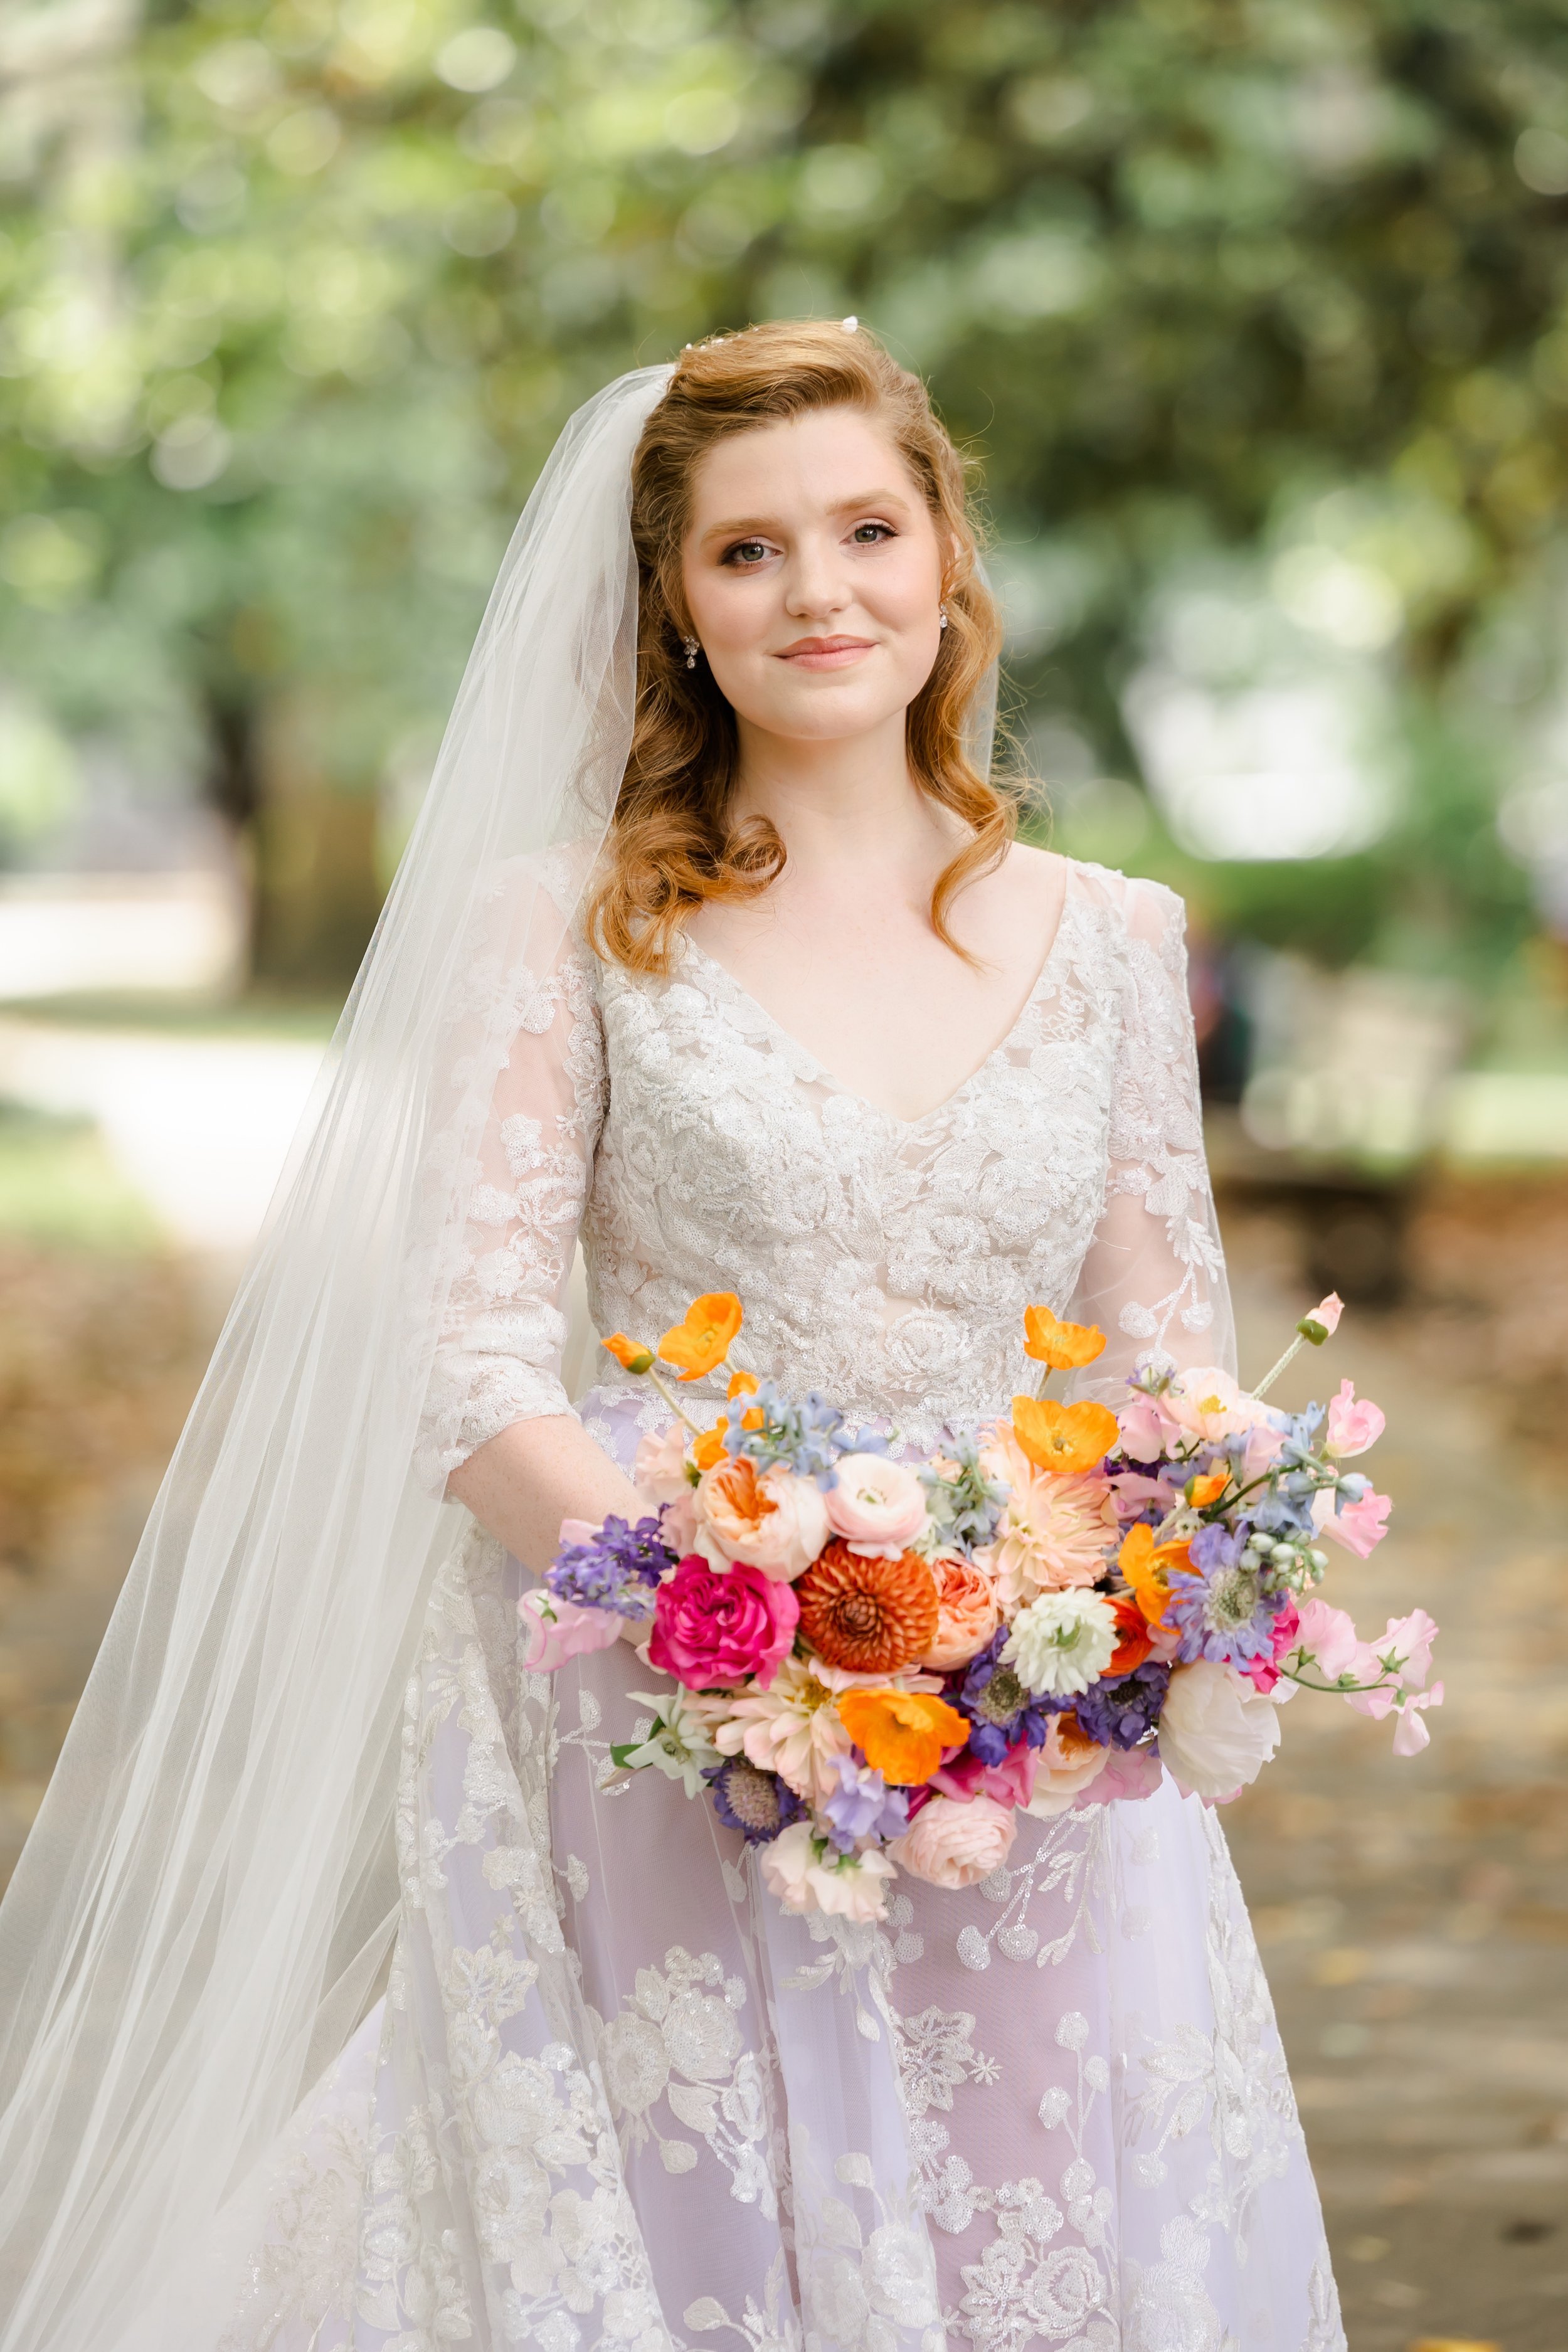 sam-and-coys-bright-and-colorful-garden-wedding-at-ships-of-the-sea-in-savannah-georgia-with-colorful-wedding-florals-desinged-by-savannah-florist-ivory-and-beau-savannah-wedding-savannah-wedding-flowers-savannah-florist-20.jpg